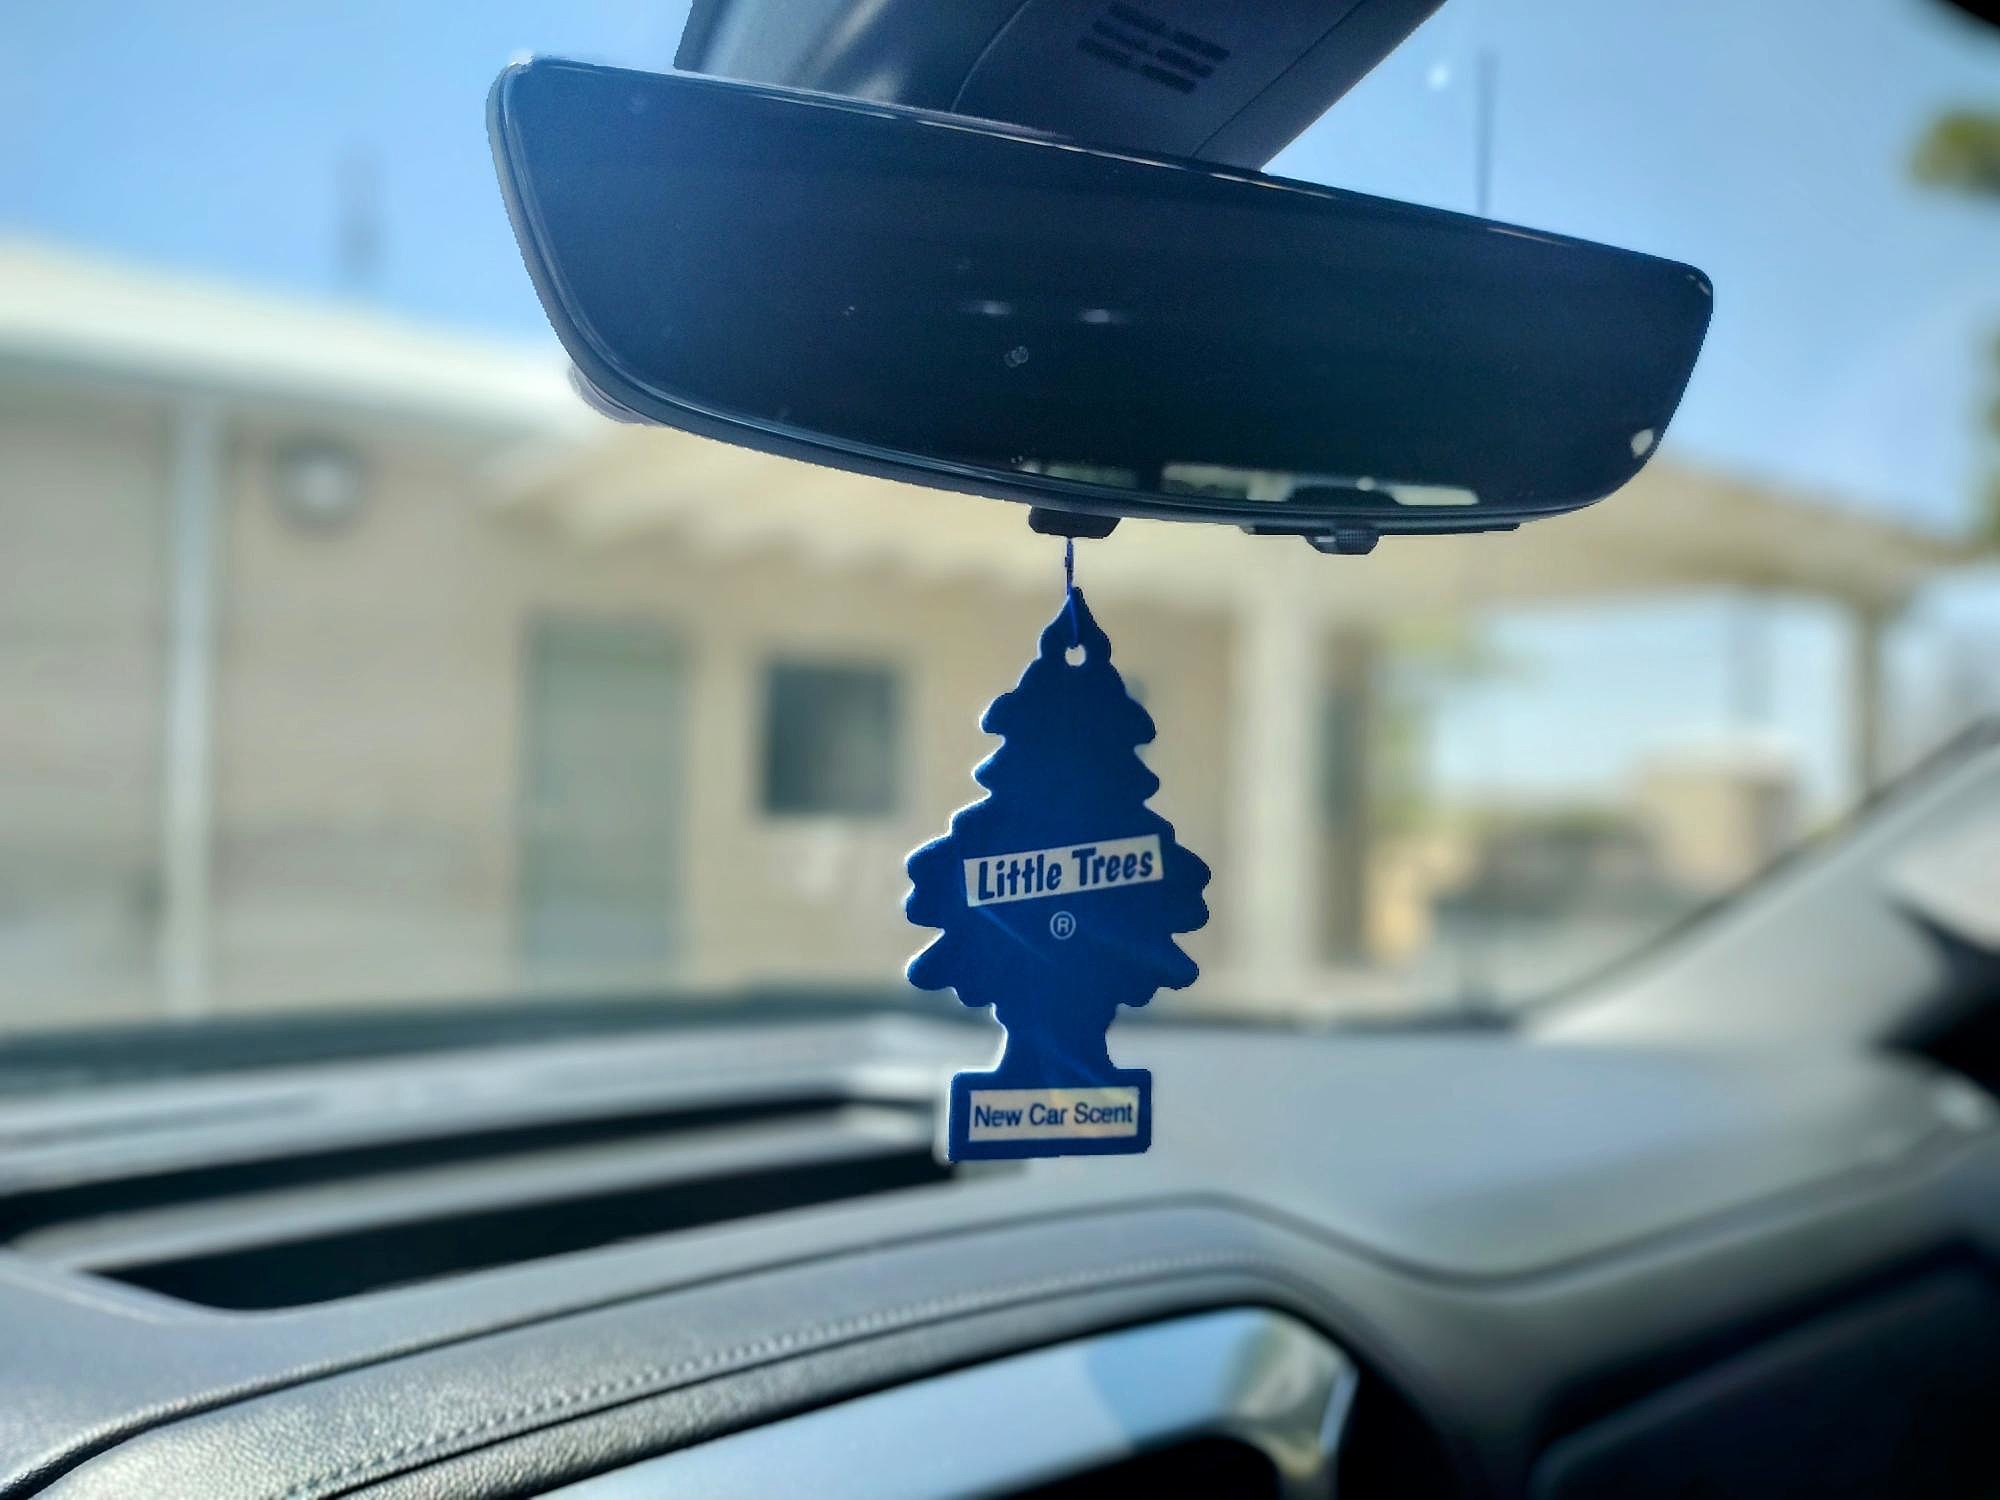 3 Reasons Not to Hang Anything from Your Rearview Mirror